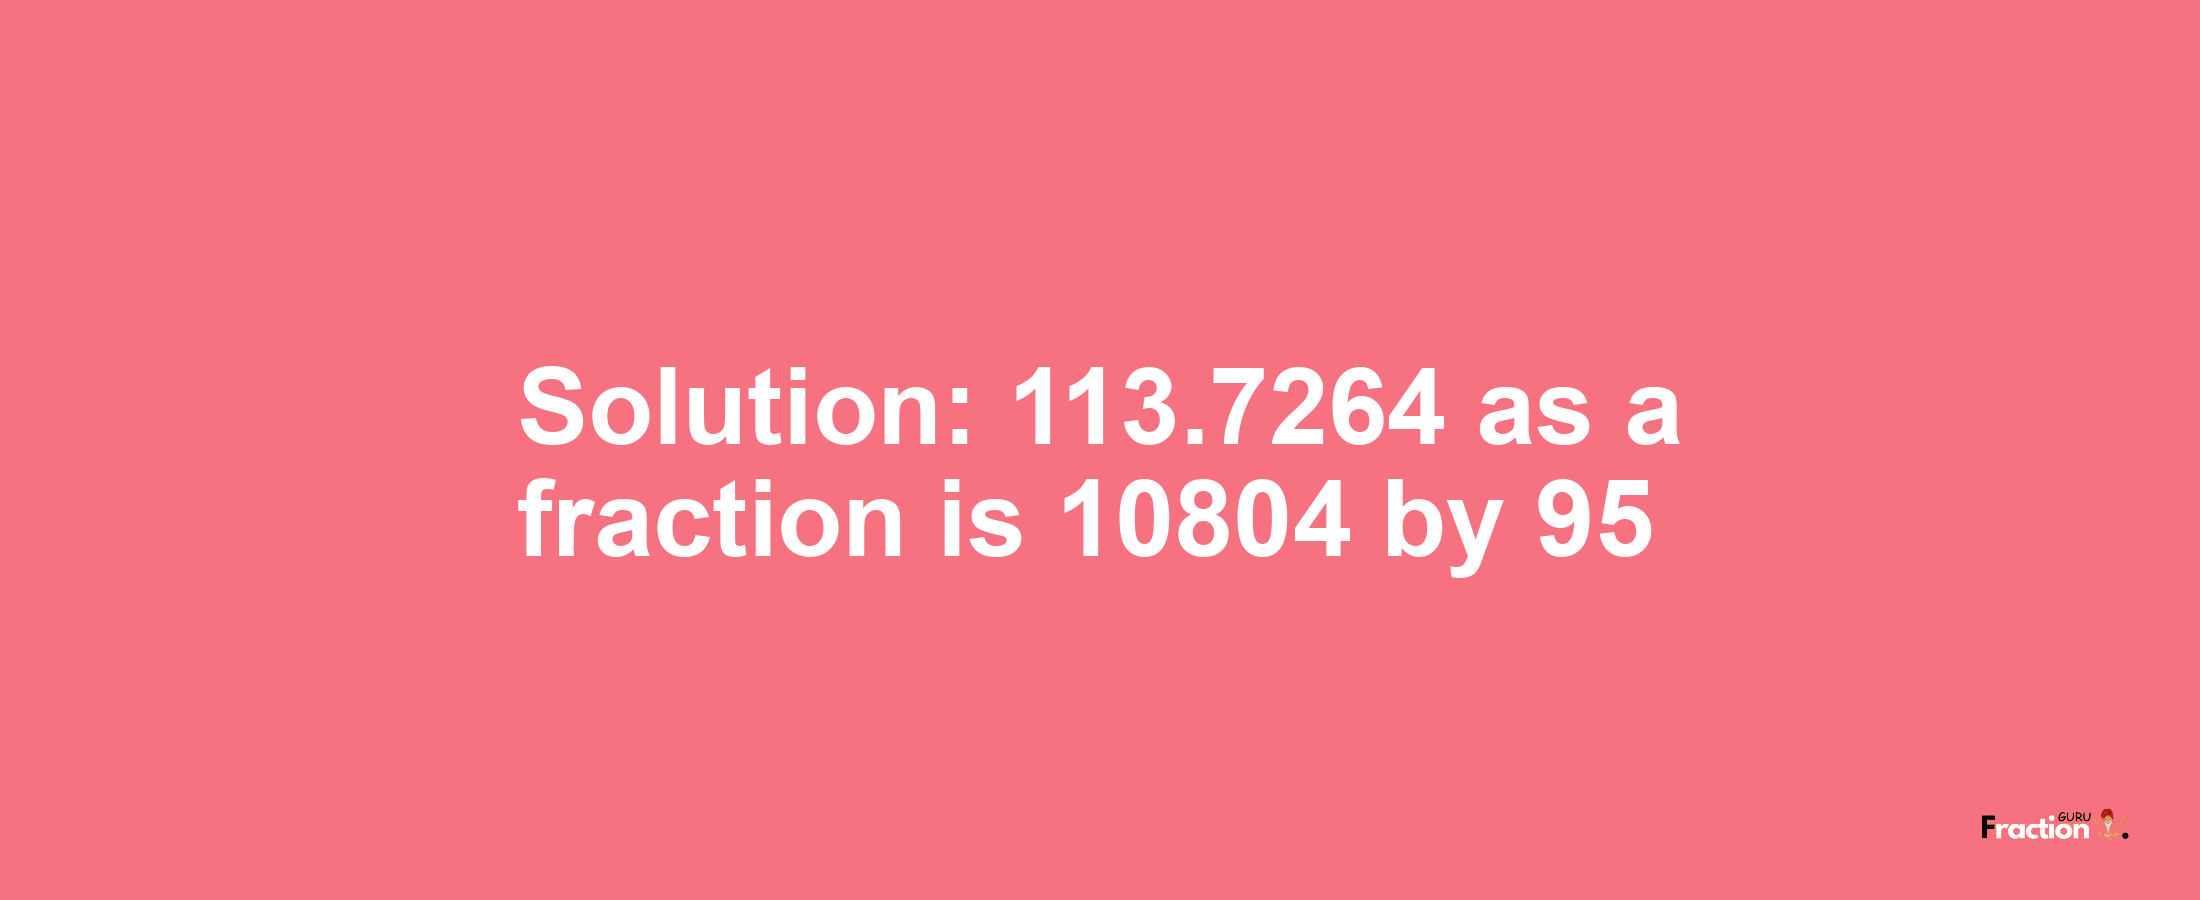 Solution:113.7264 as a fraction is 10804/95